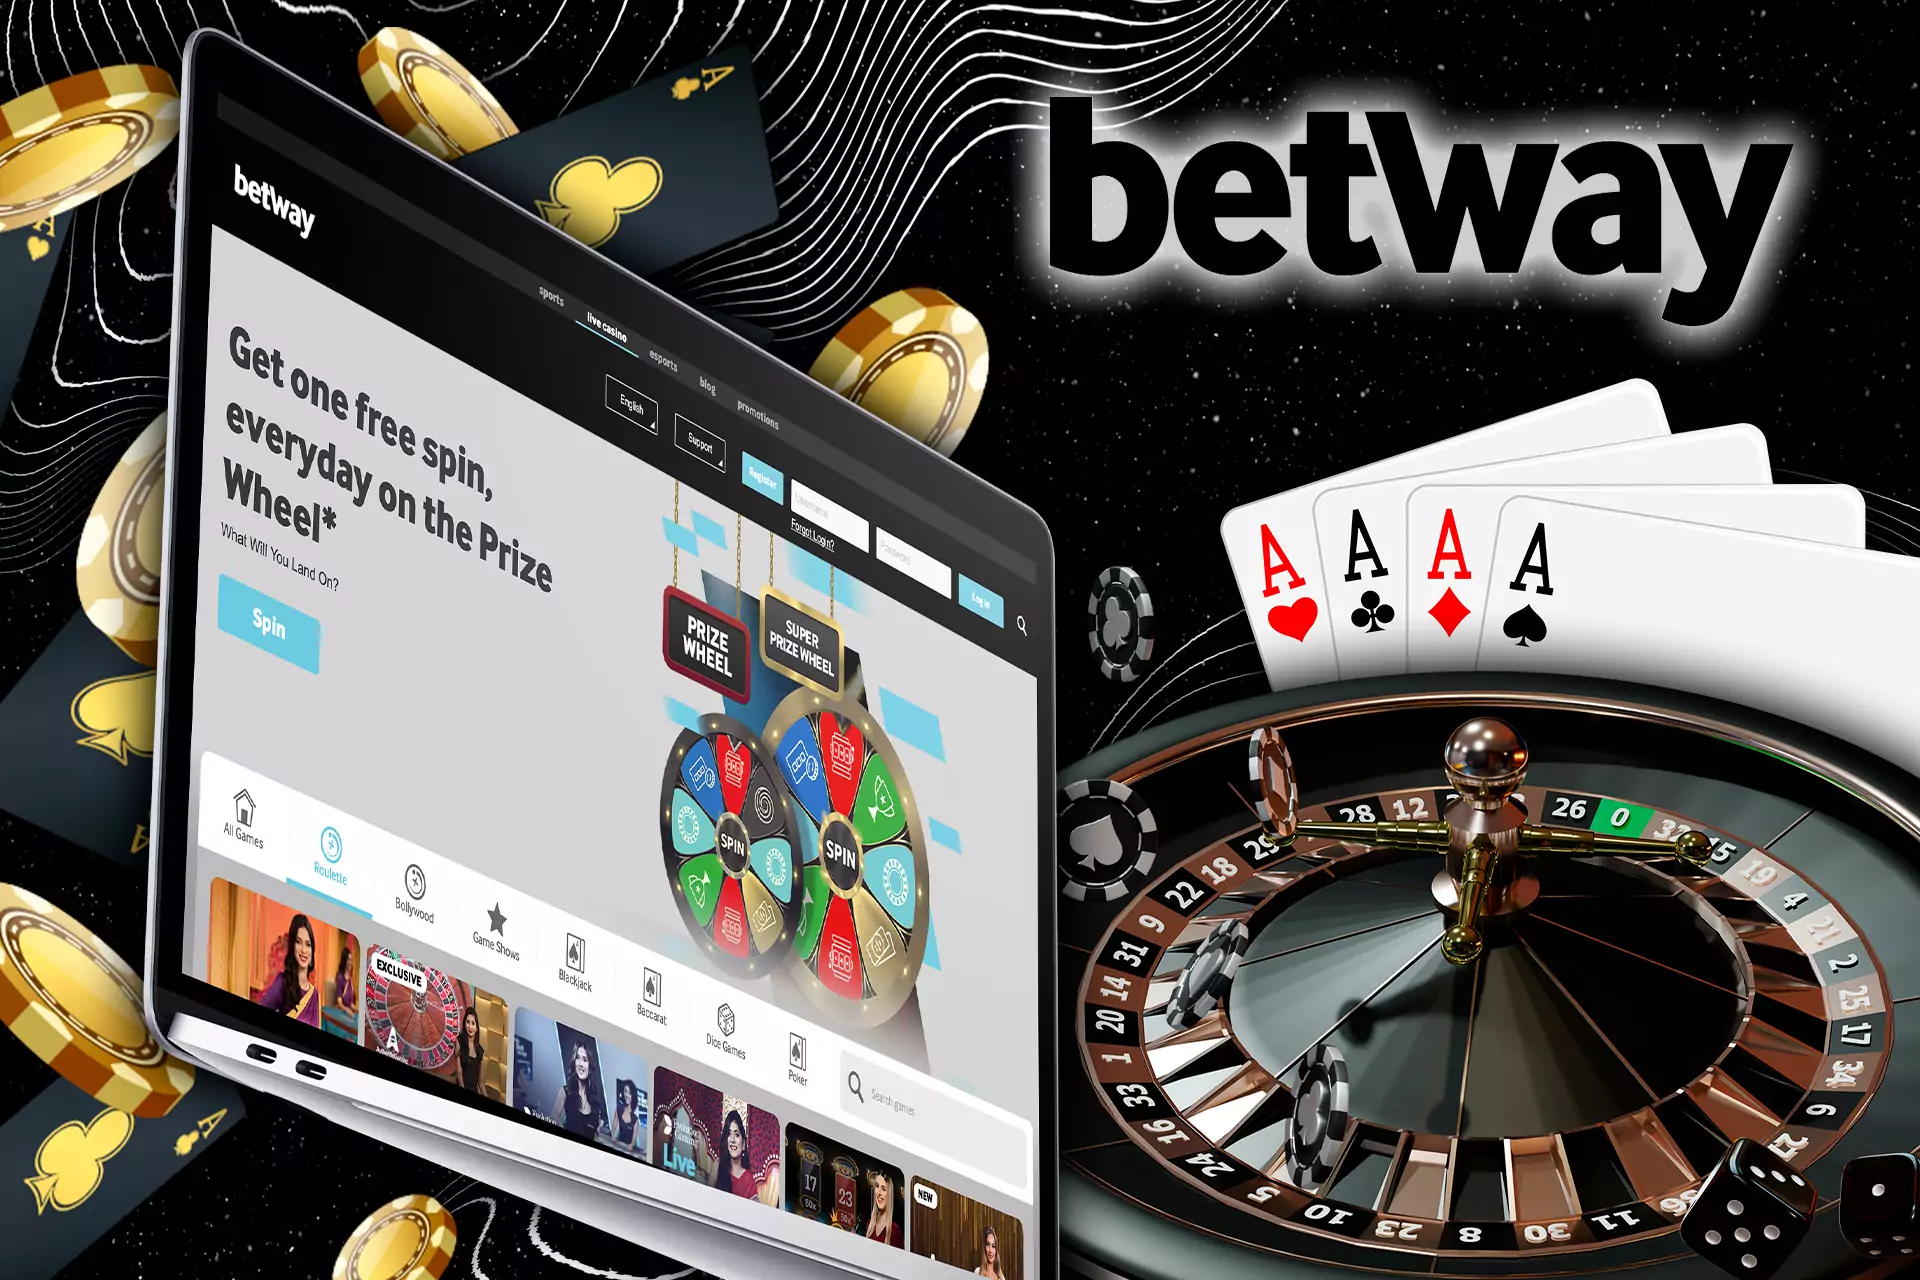 There are many classic and new games available at Betway online casino.